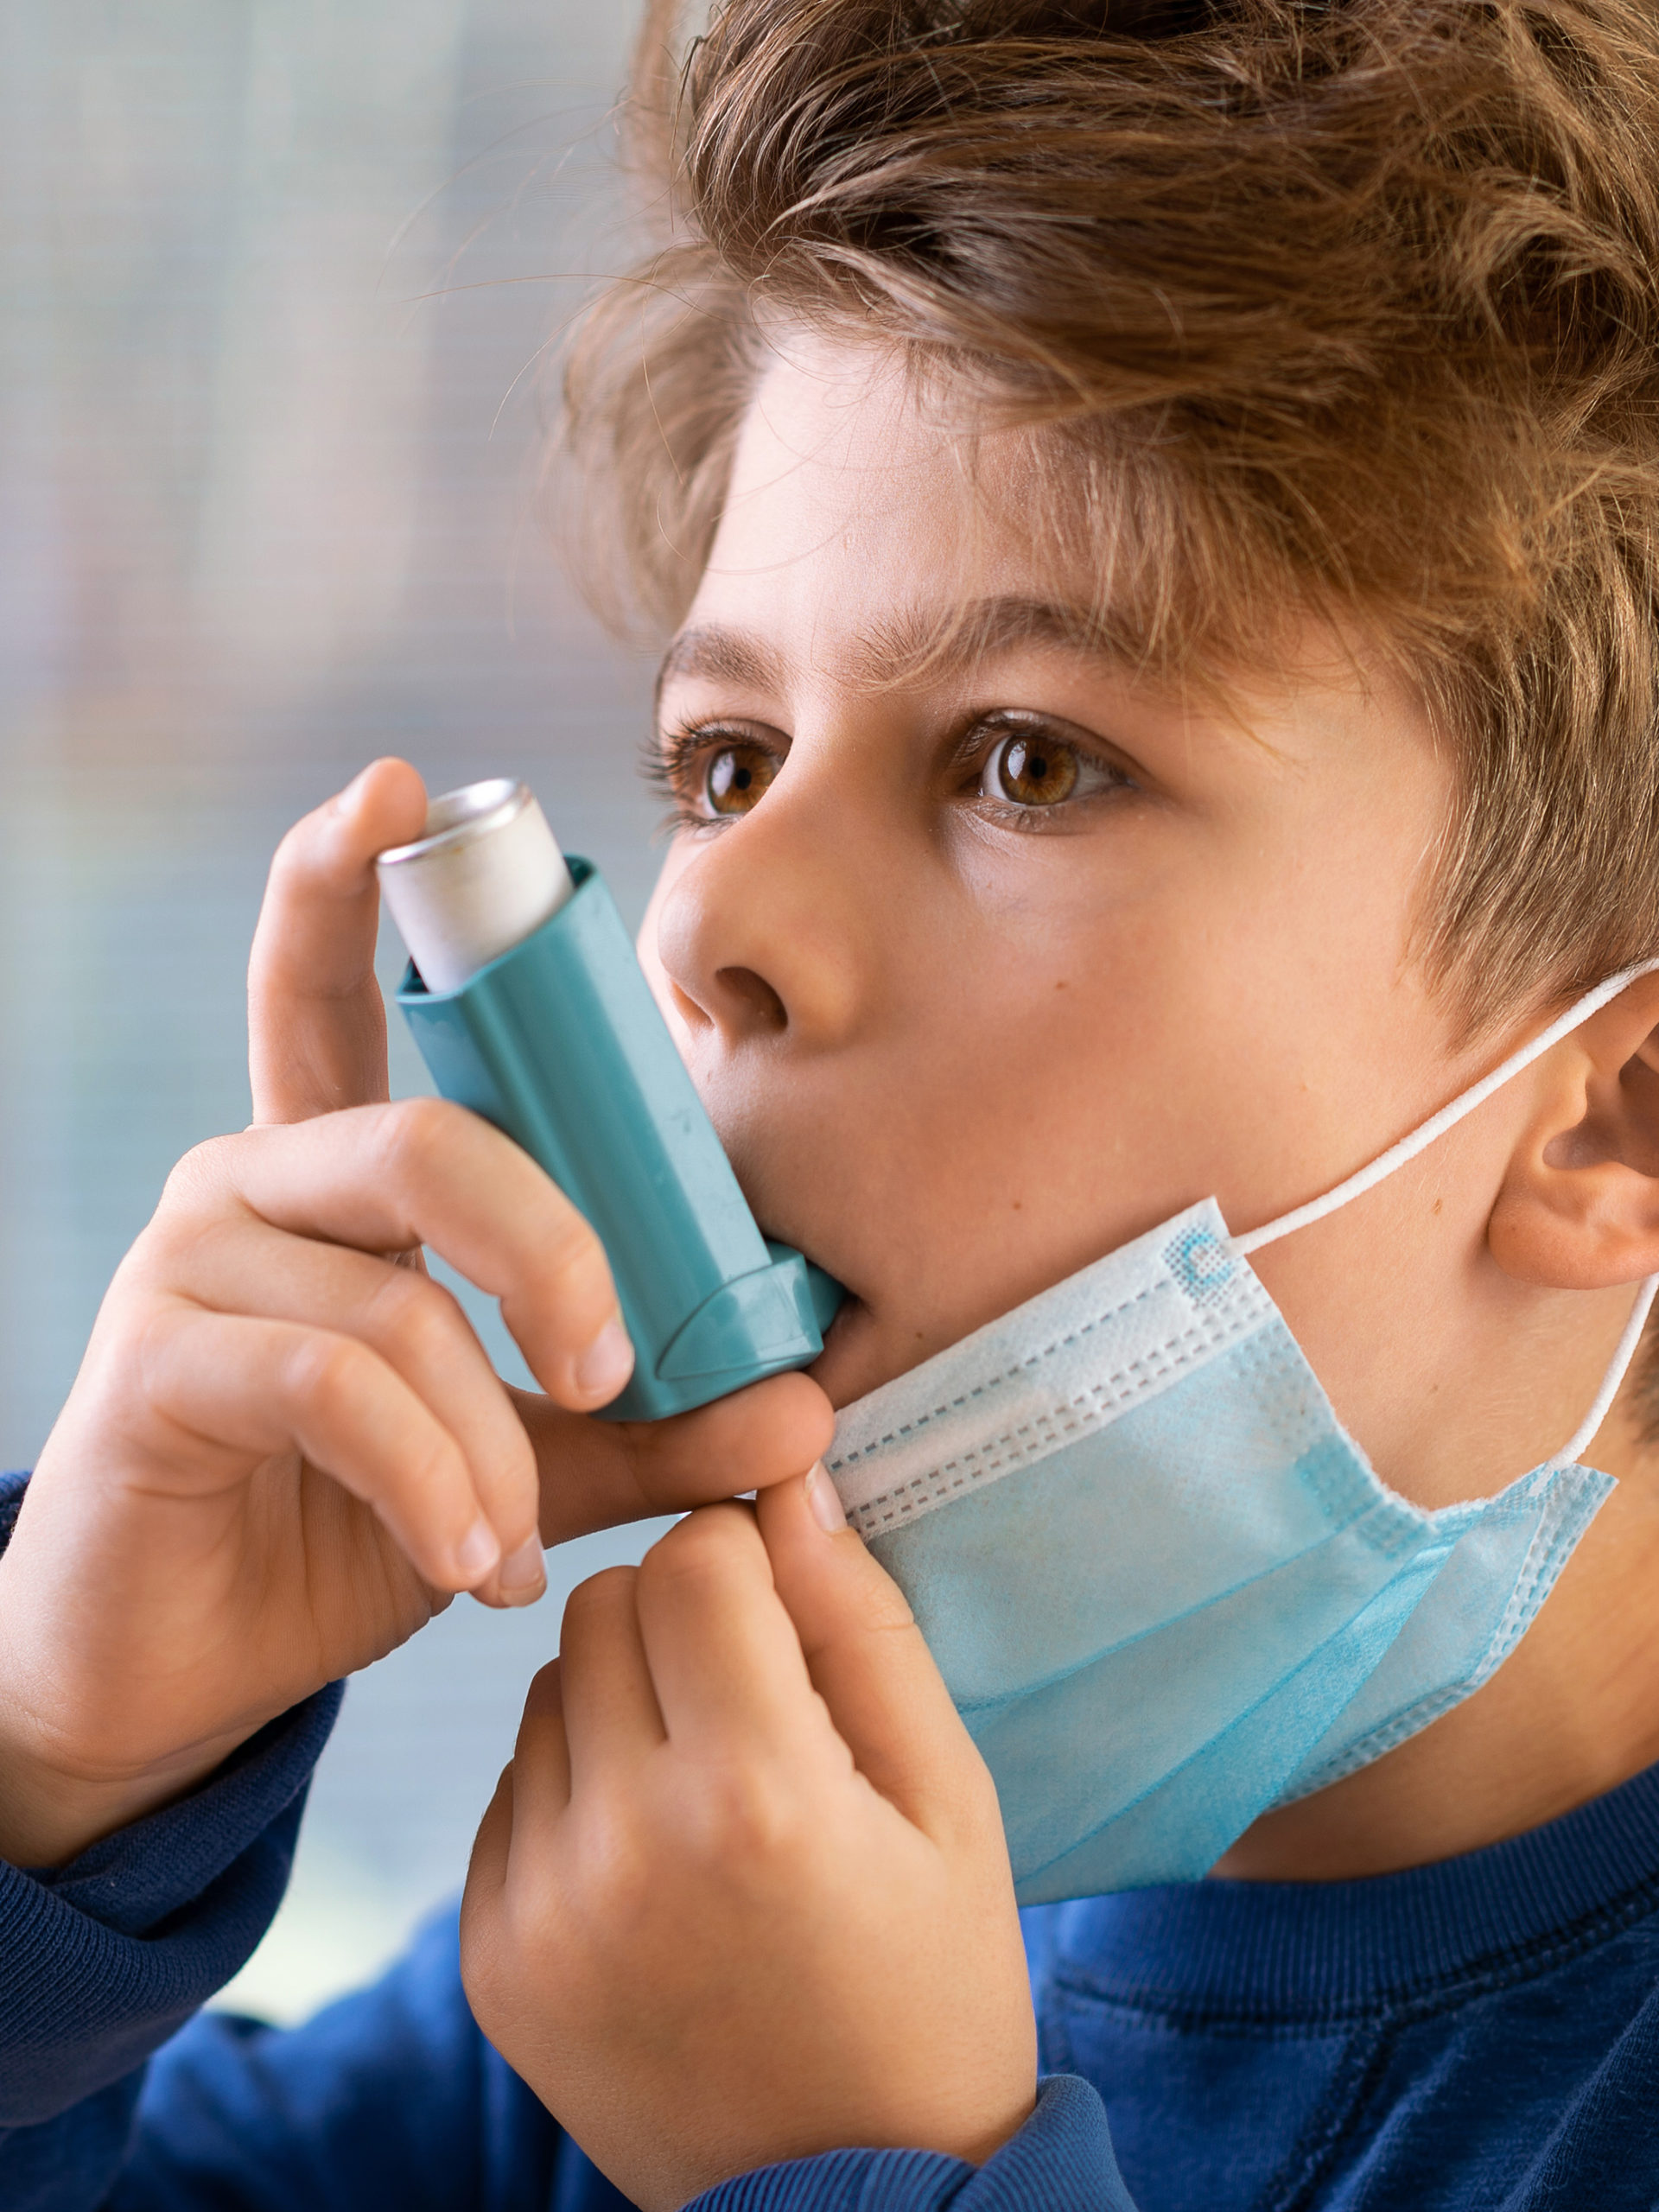 Young Boy with face mask using asthma inhaler amid Covid-19 pandemic